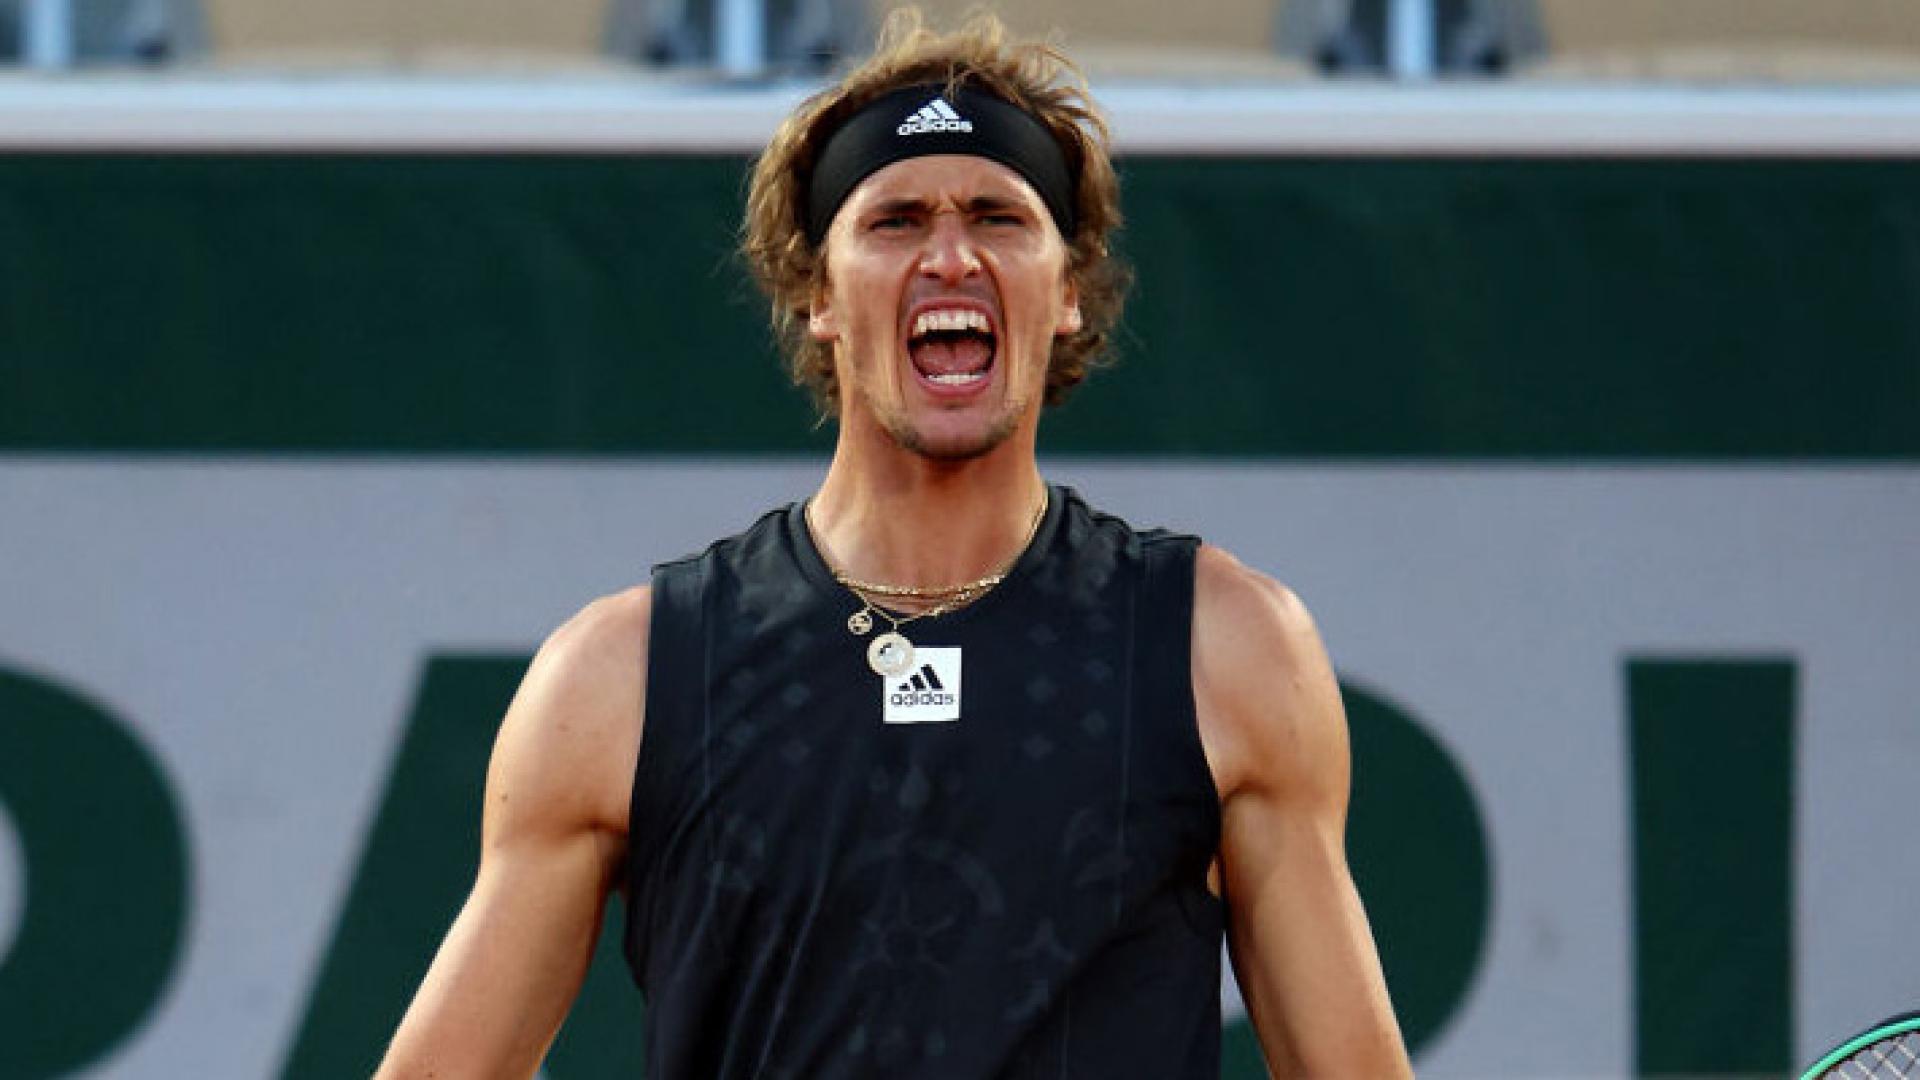 French Open Quarterfinals LIVE: Alexander Zverev defeats Carlos Alcaraz in a four set thriller to advance to French Open semifinals